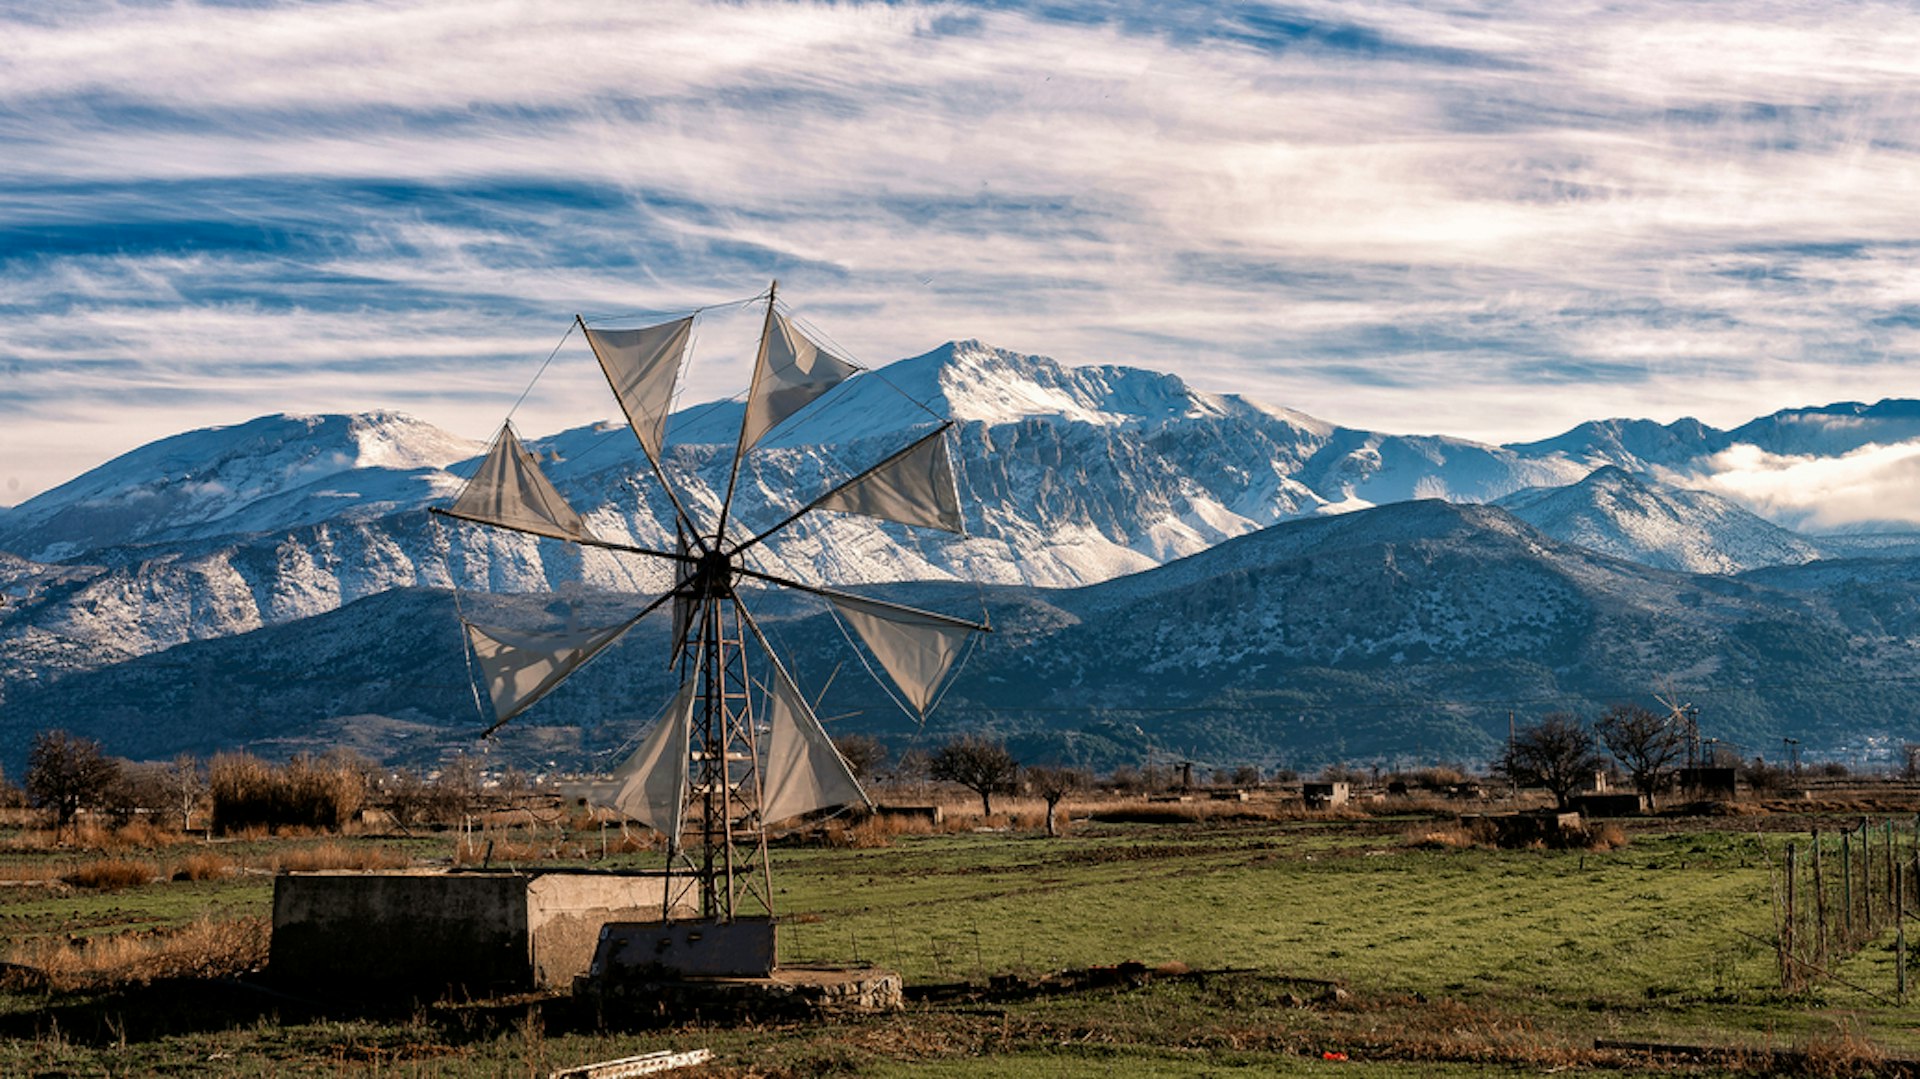 Windmills on a plateau with snow-capped mountains in the background